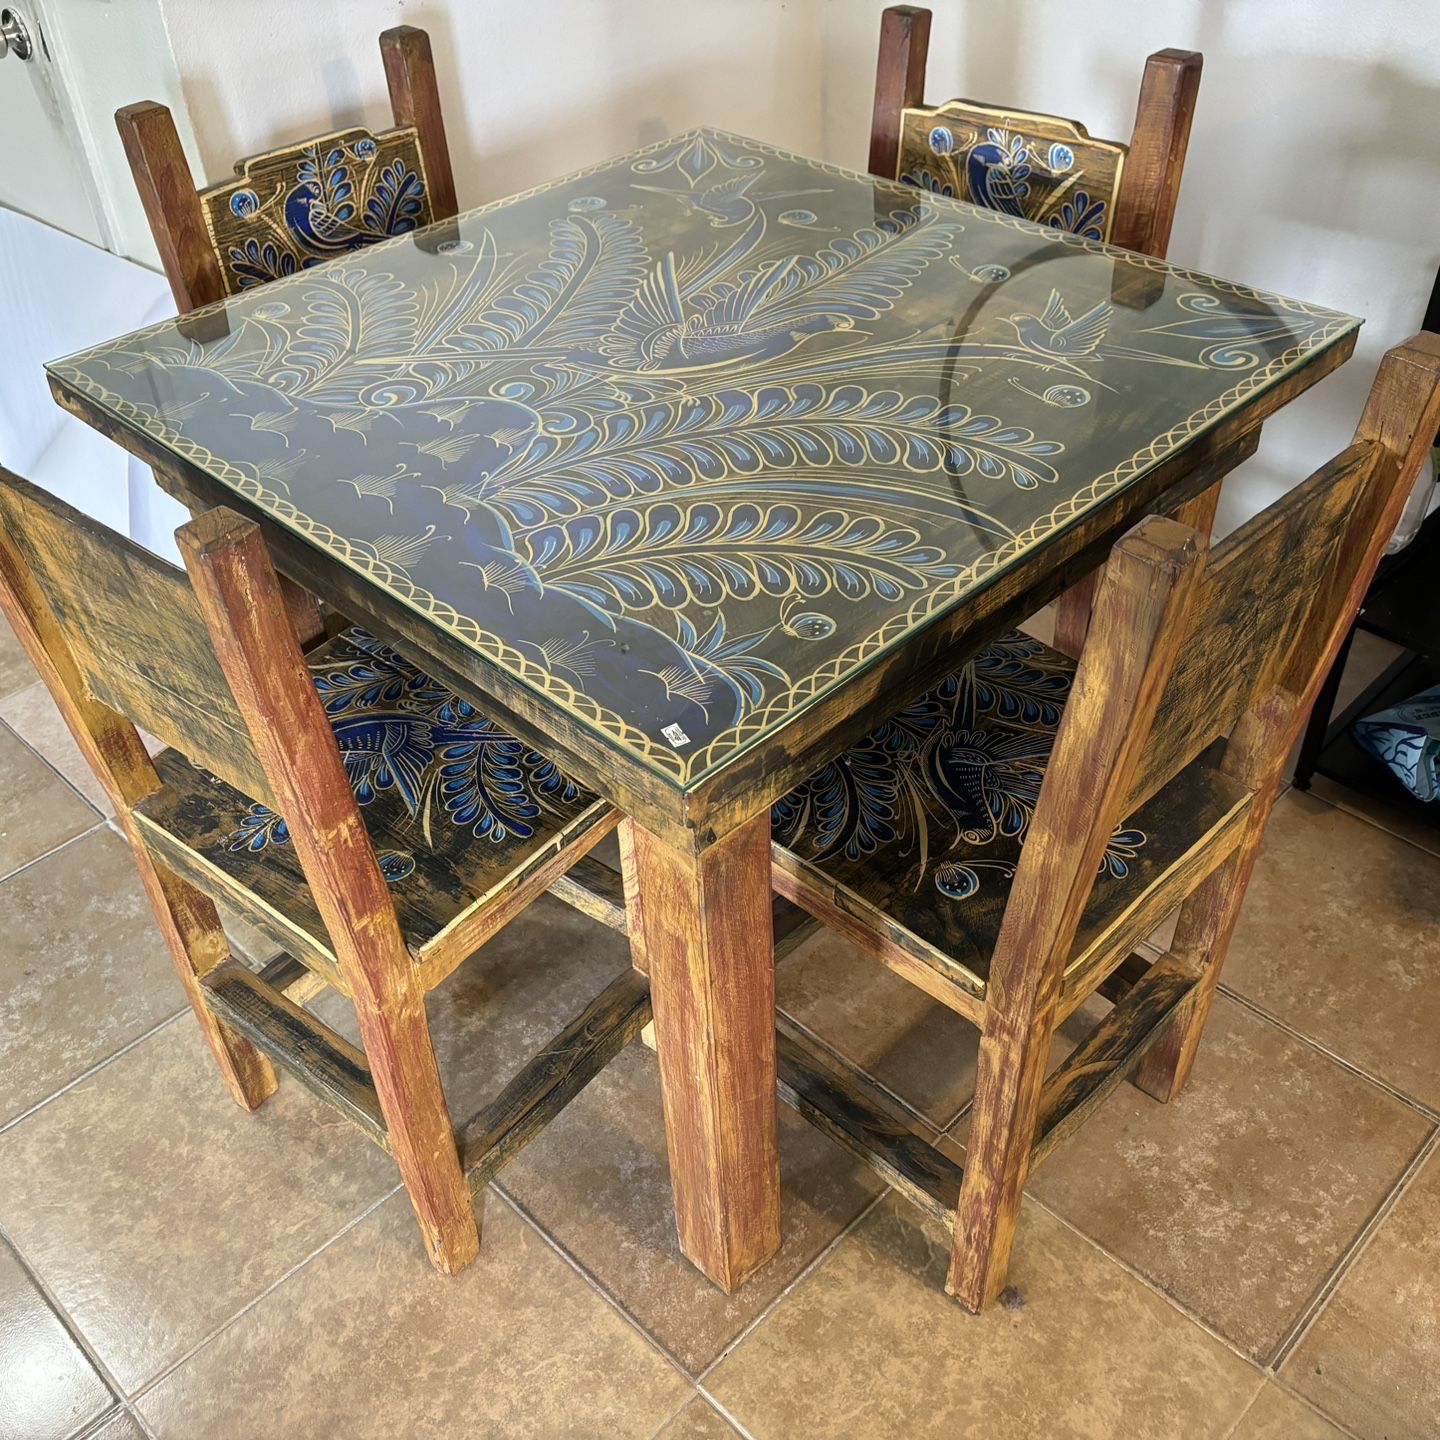 Hand Painted Table And Chairs